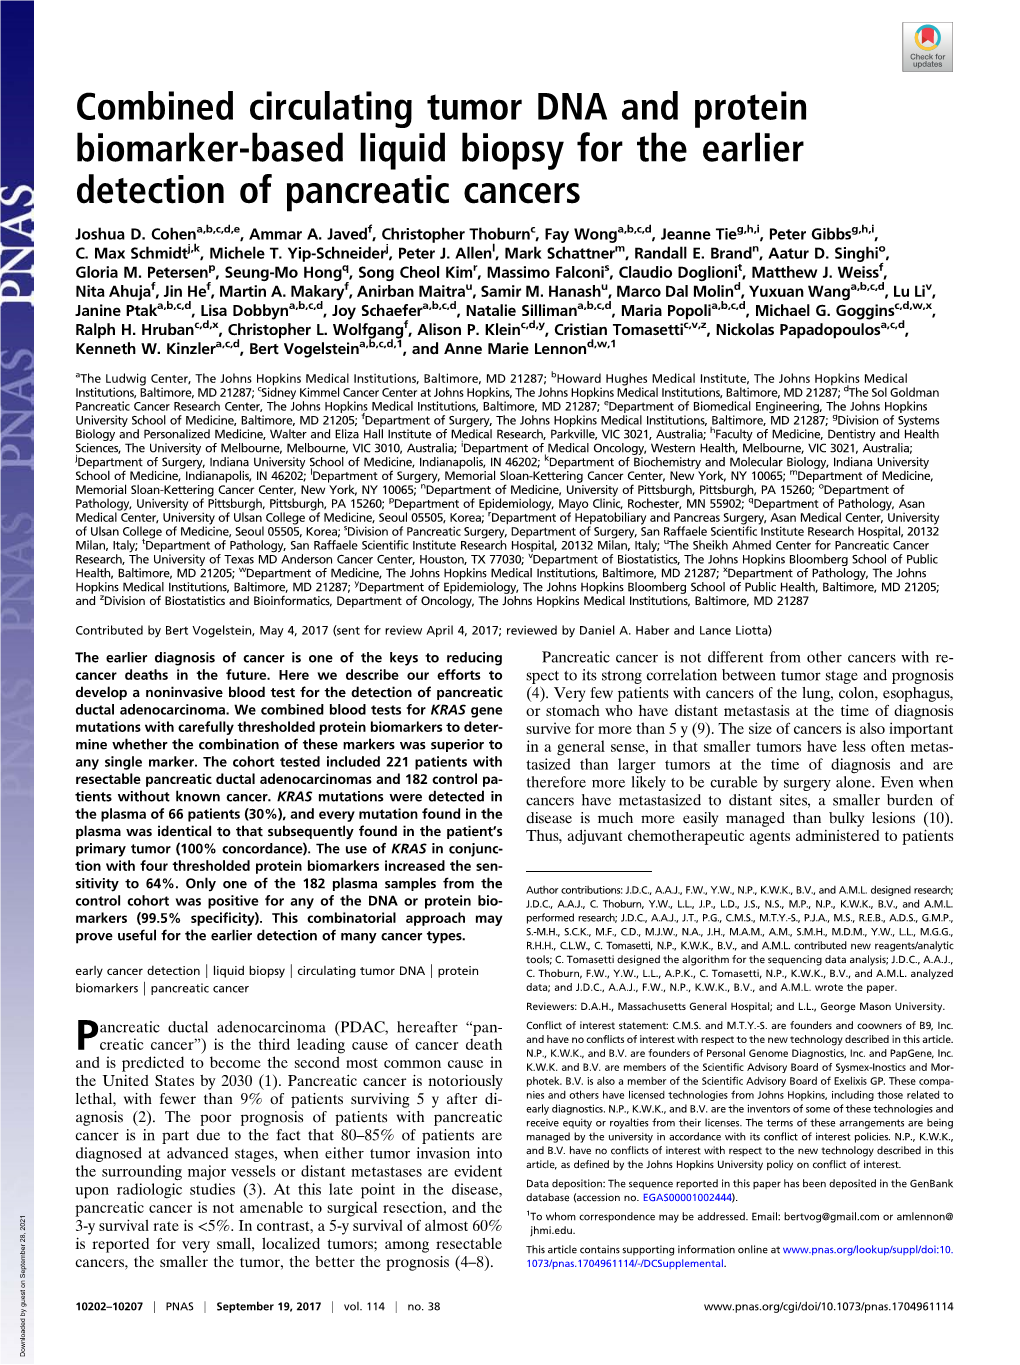 Combined Circulating Tumor DNA and Protein Biomarker-Based Liquid Biopsy for the Earlier Detection of Pancreatic Cancers